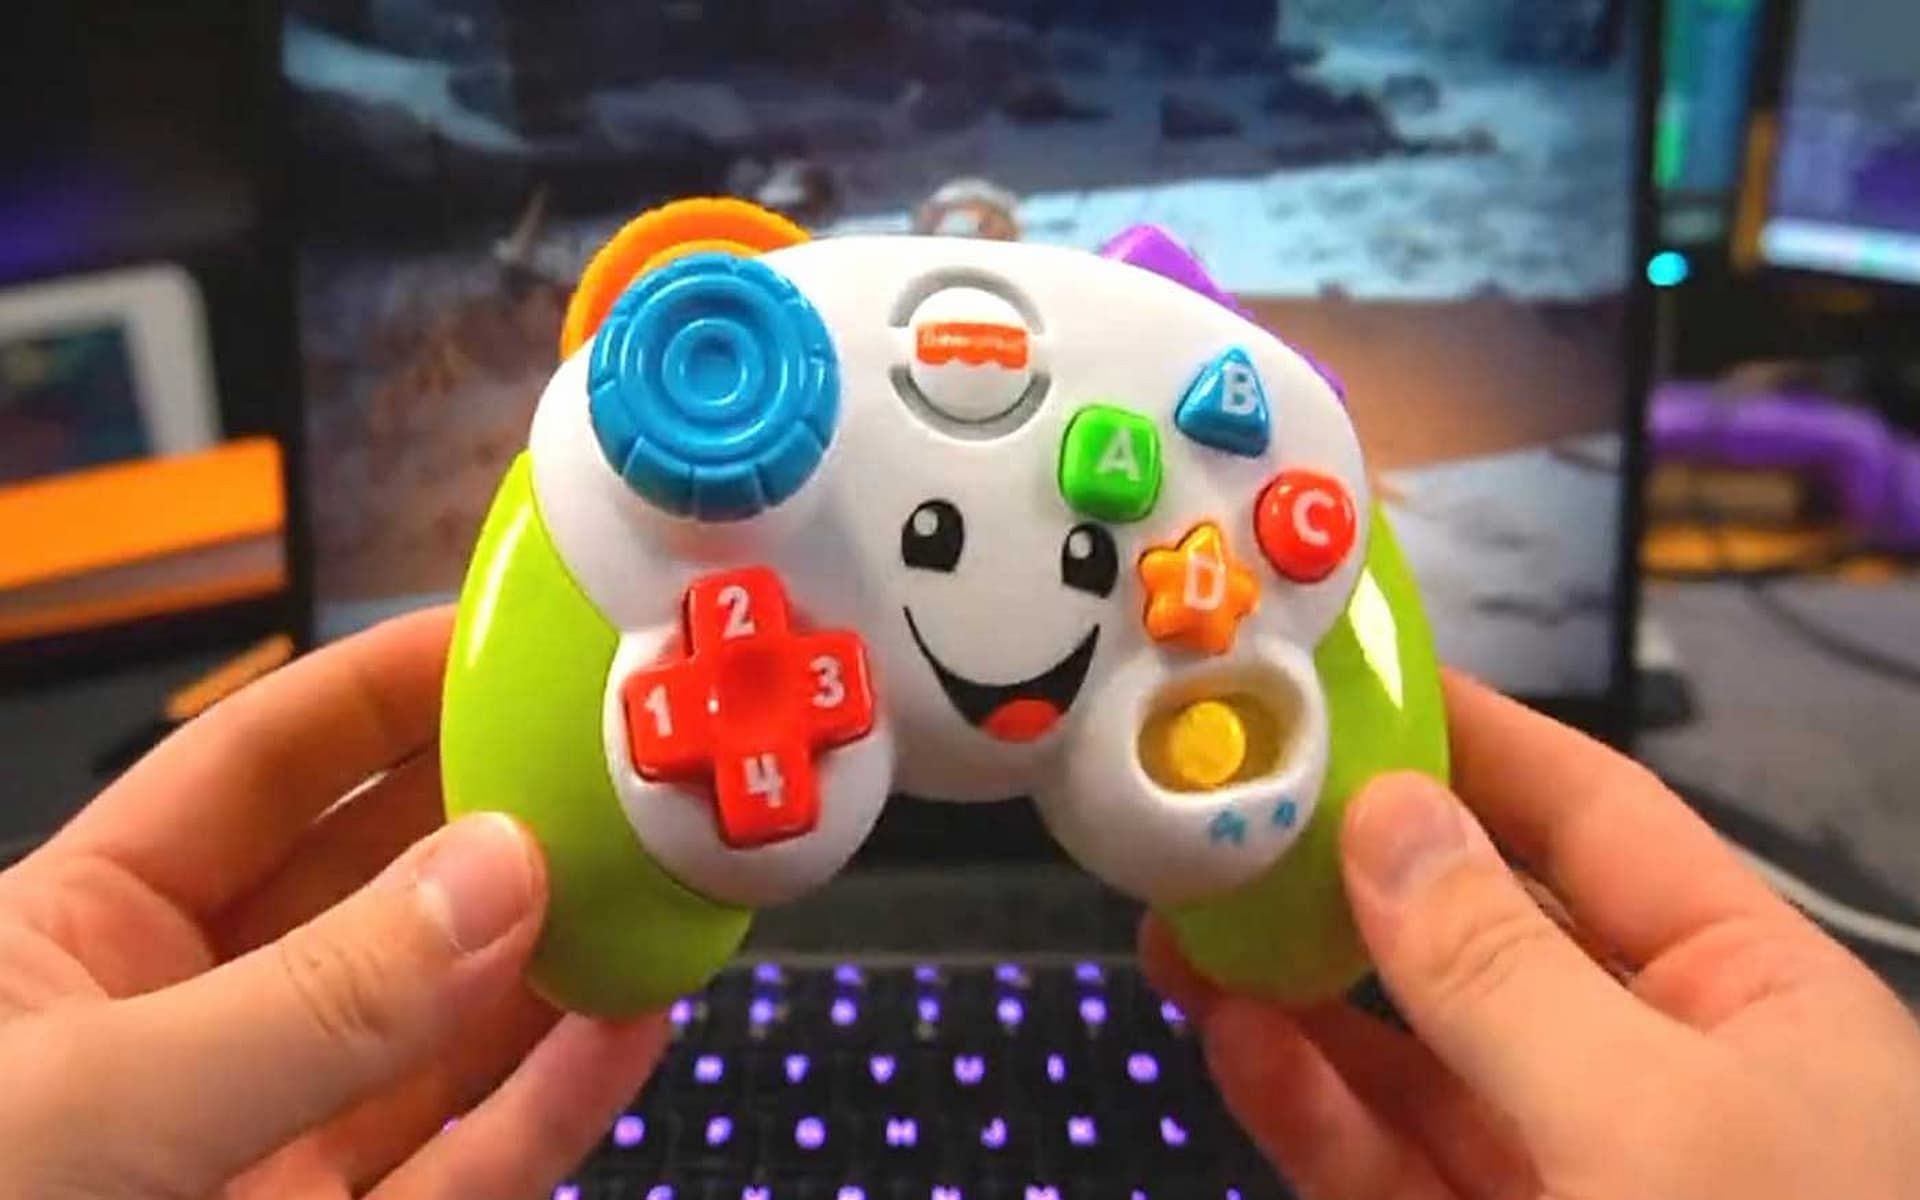 The toy controller was modded to work on an Xbox and will be used to beat Elden Ring (Image via Rudeism)